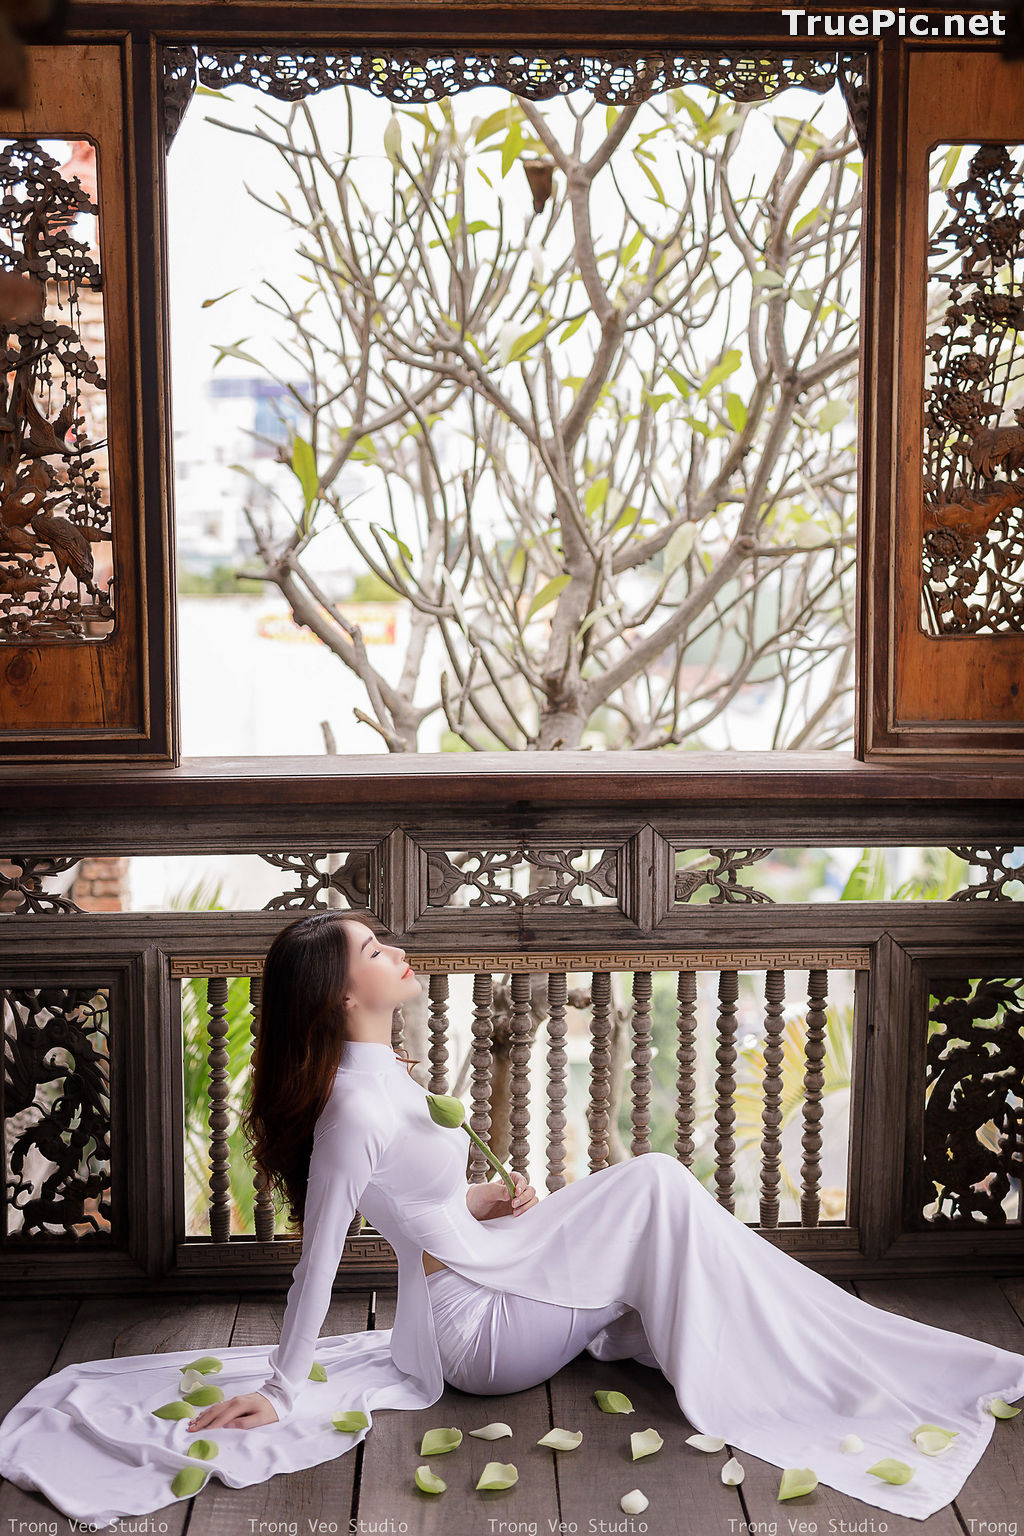 Image The Beauty of Vietnamese Girls with Traditional Dress (Ao Dai) #4 - TruePic.net - Picture-49